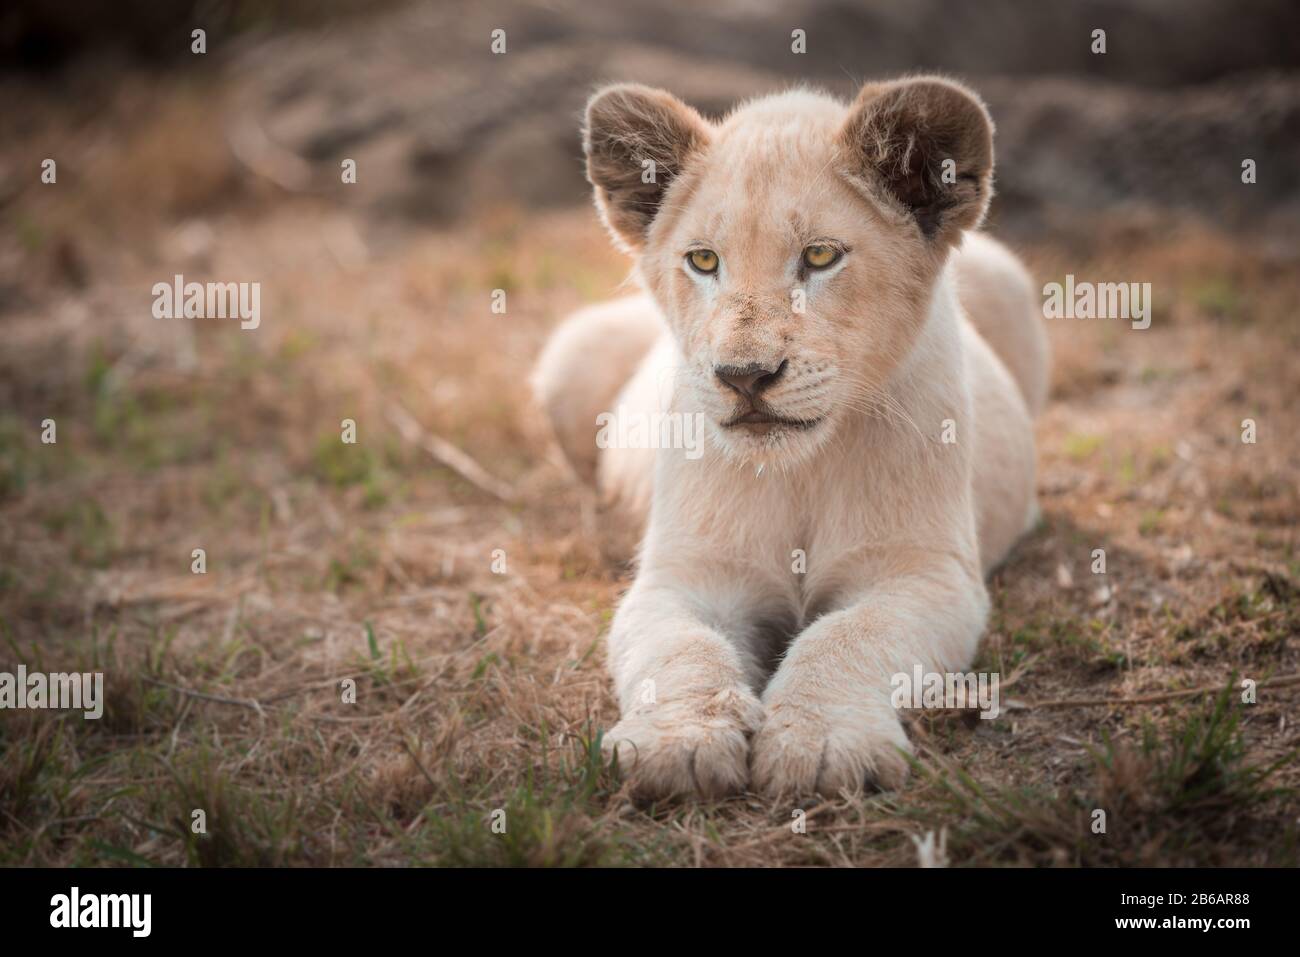 A white lion cub (leo panthera) lying in the grass angled towards the camera Stock Photo